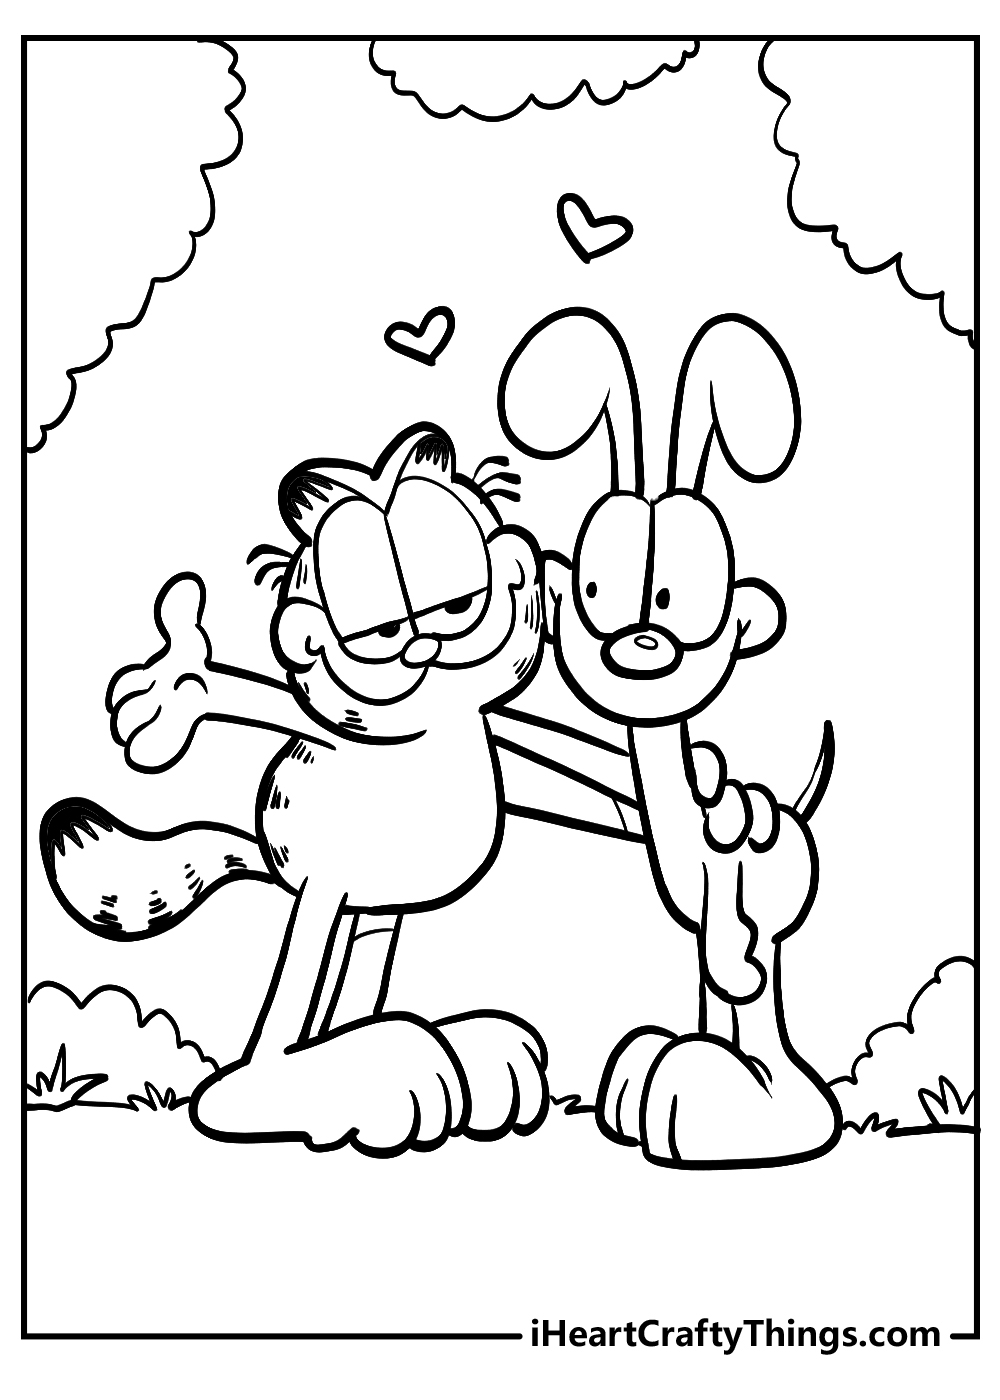 garfield and odie coloring pages